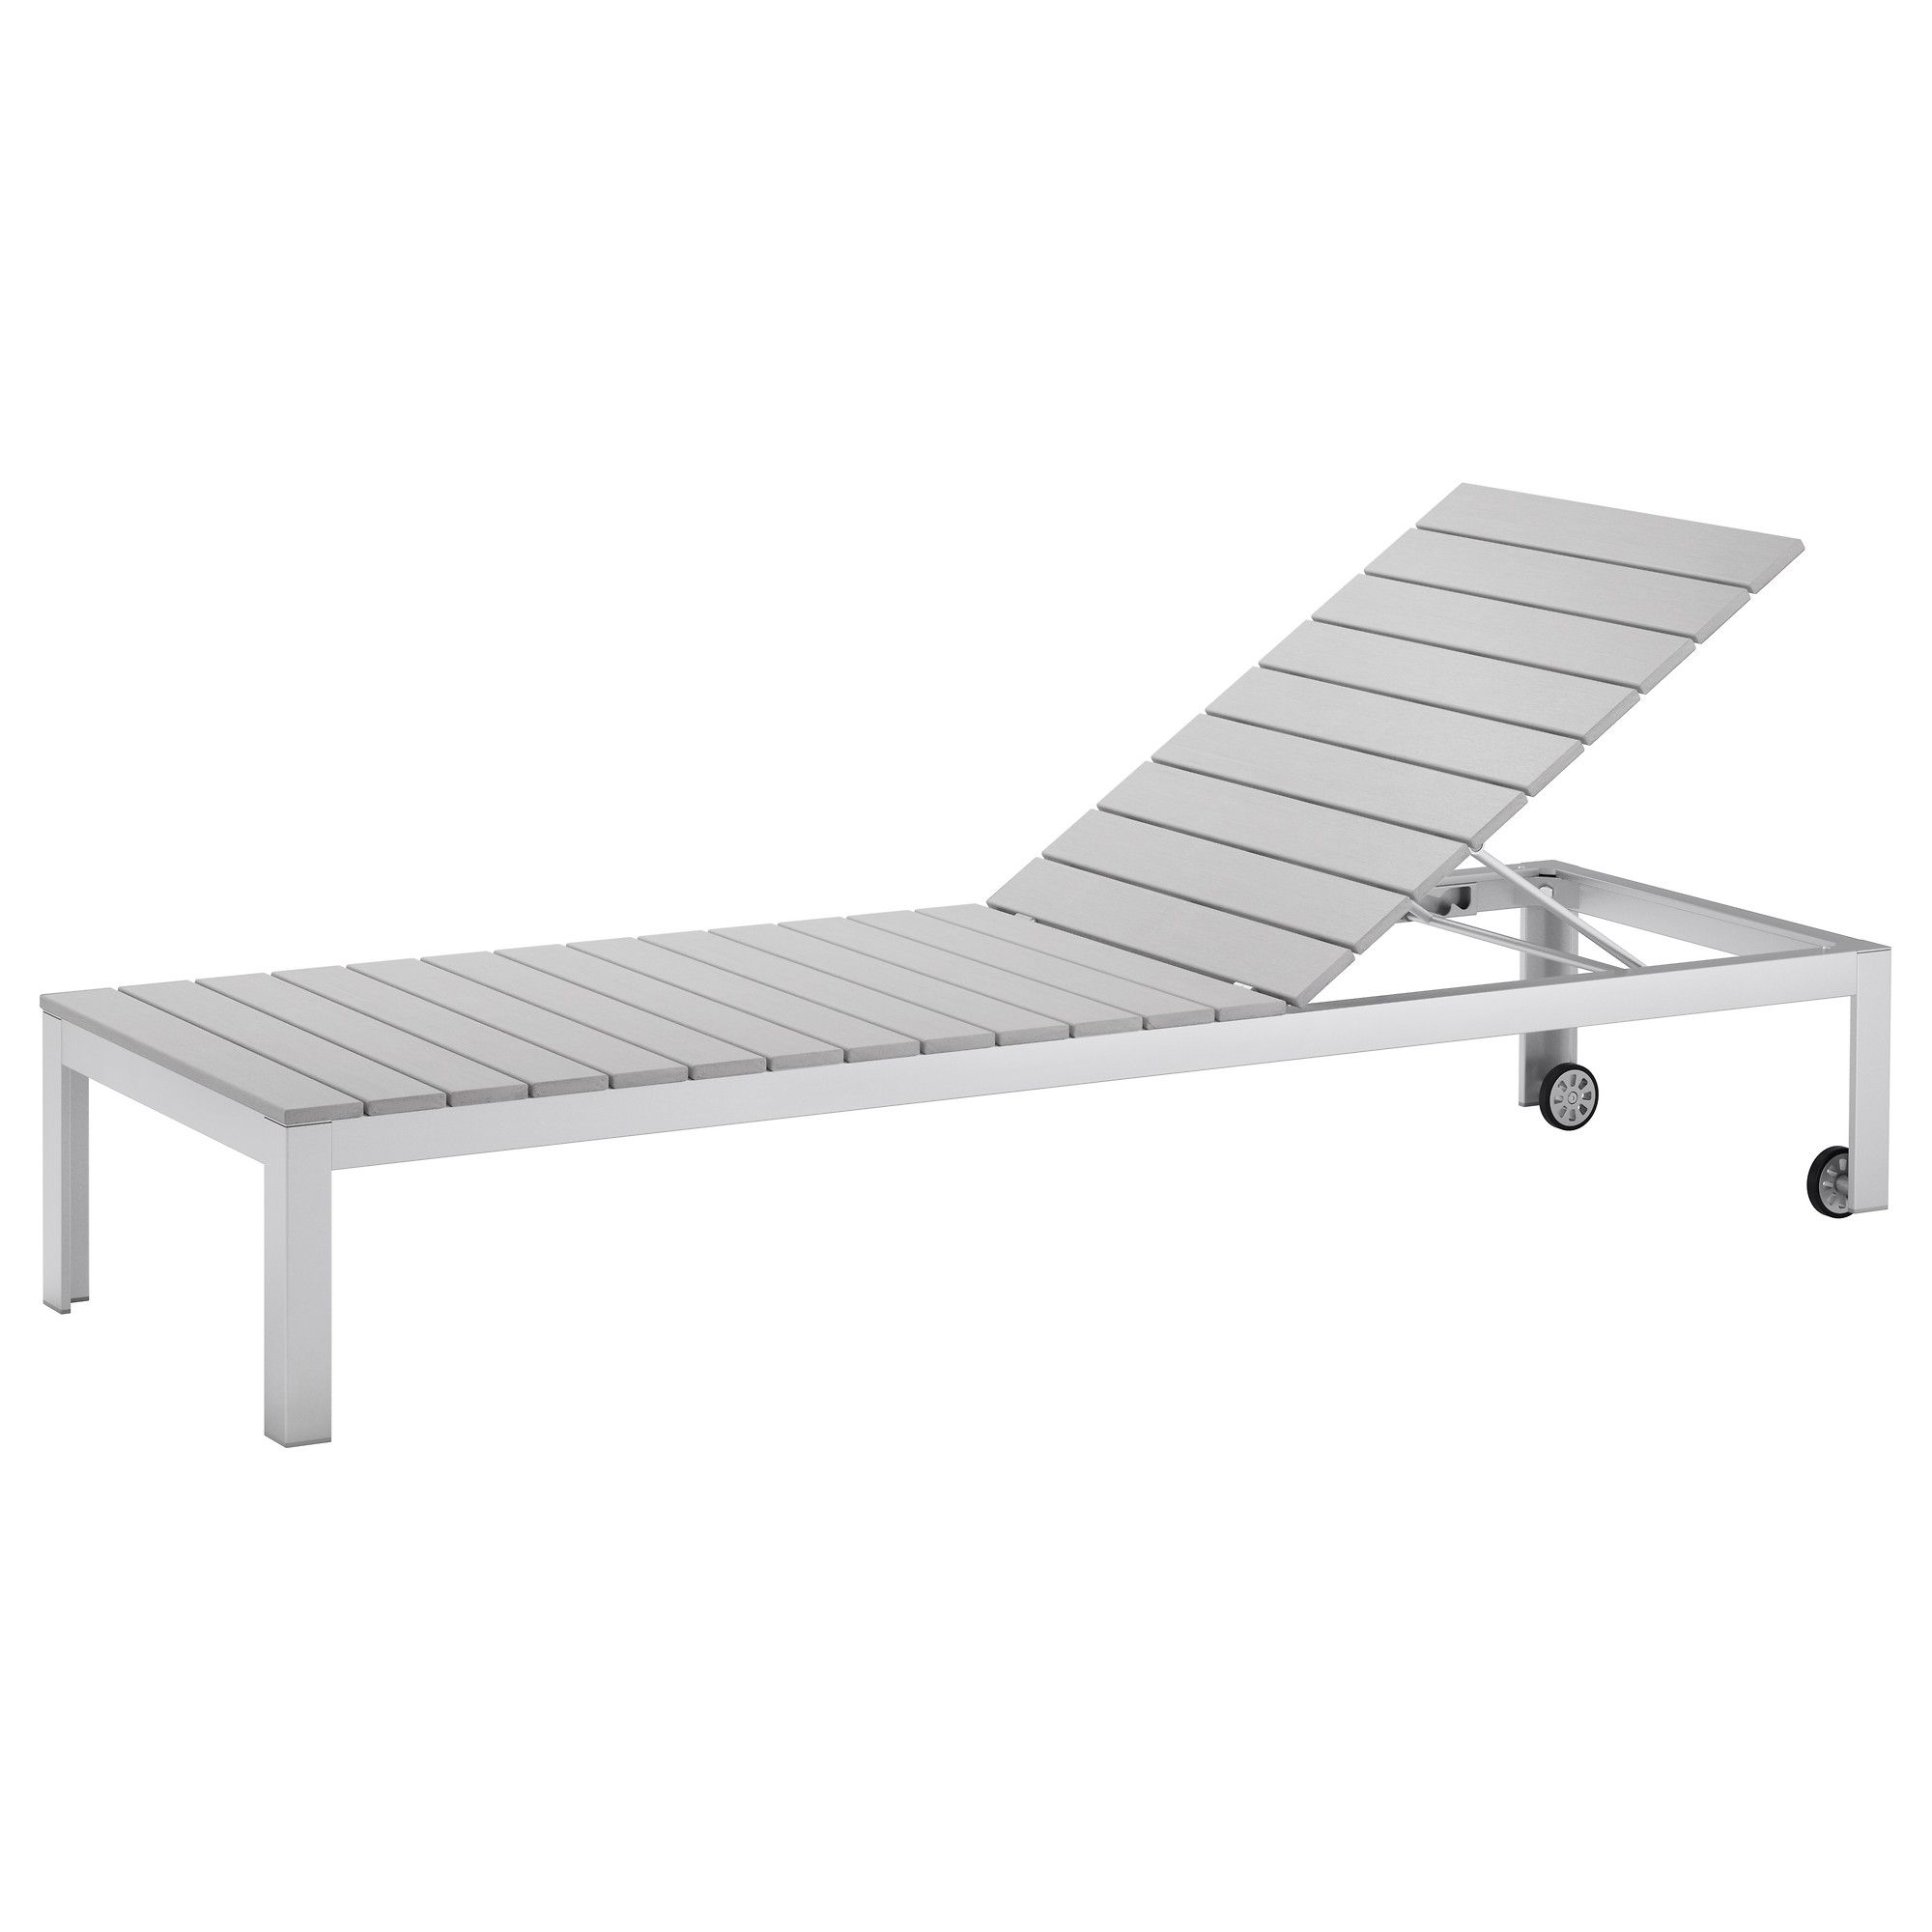 Ikea Outdoor Chaise Lounge Chairs Throughout Fashionable Ikea – Falster, Chaise, Gray, , , The Back Can Be Adjusted To Six (View 2 of 15)